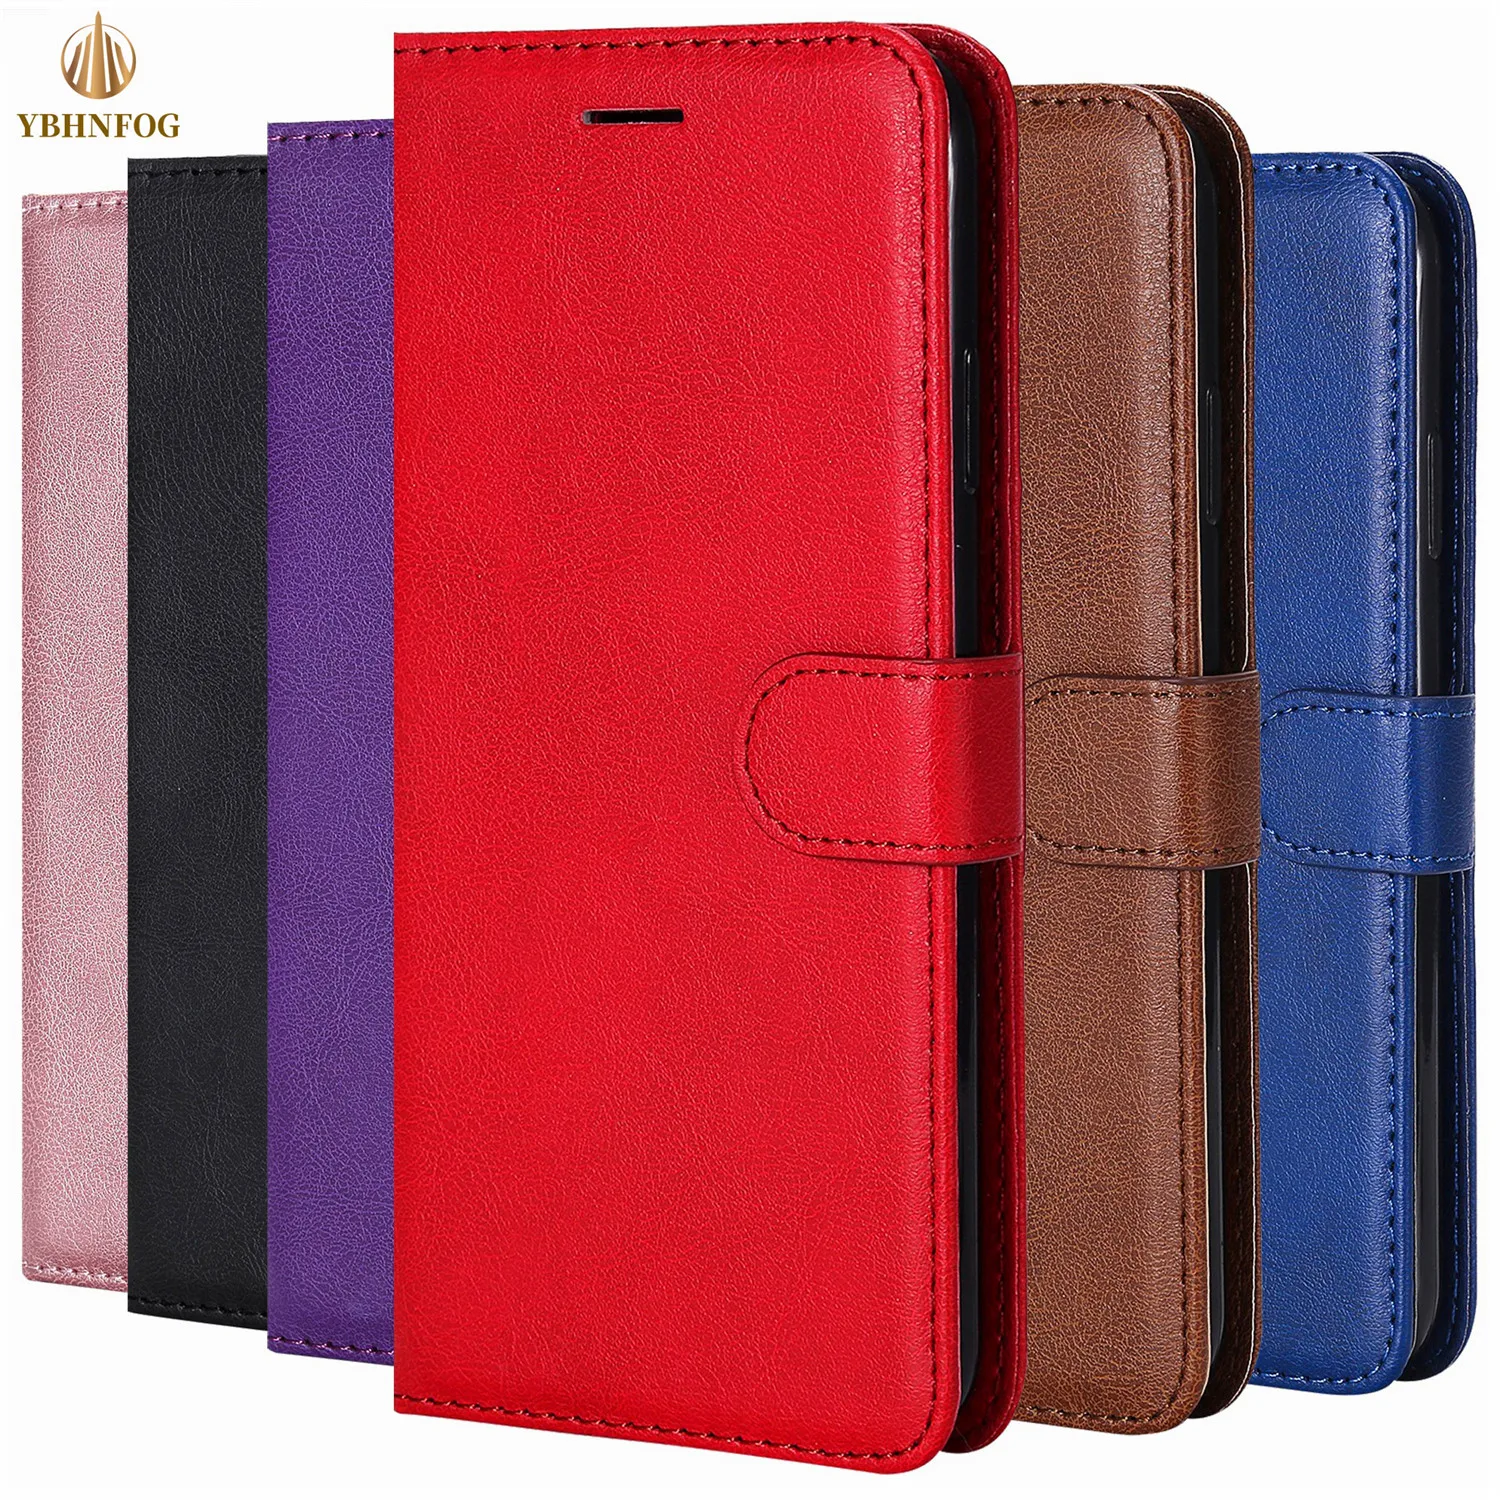 Flip Case For Xiaomi 11 10T Lite POCO F3 M3 M4 X3 NFC Mi A3 9T 10 11T Note 10 Pro Holder Leather Wallet Stand Cover Phone Coque